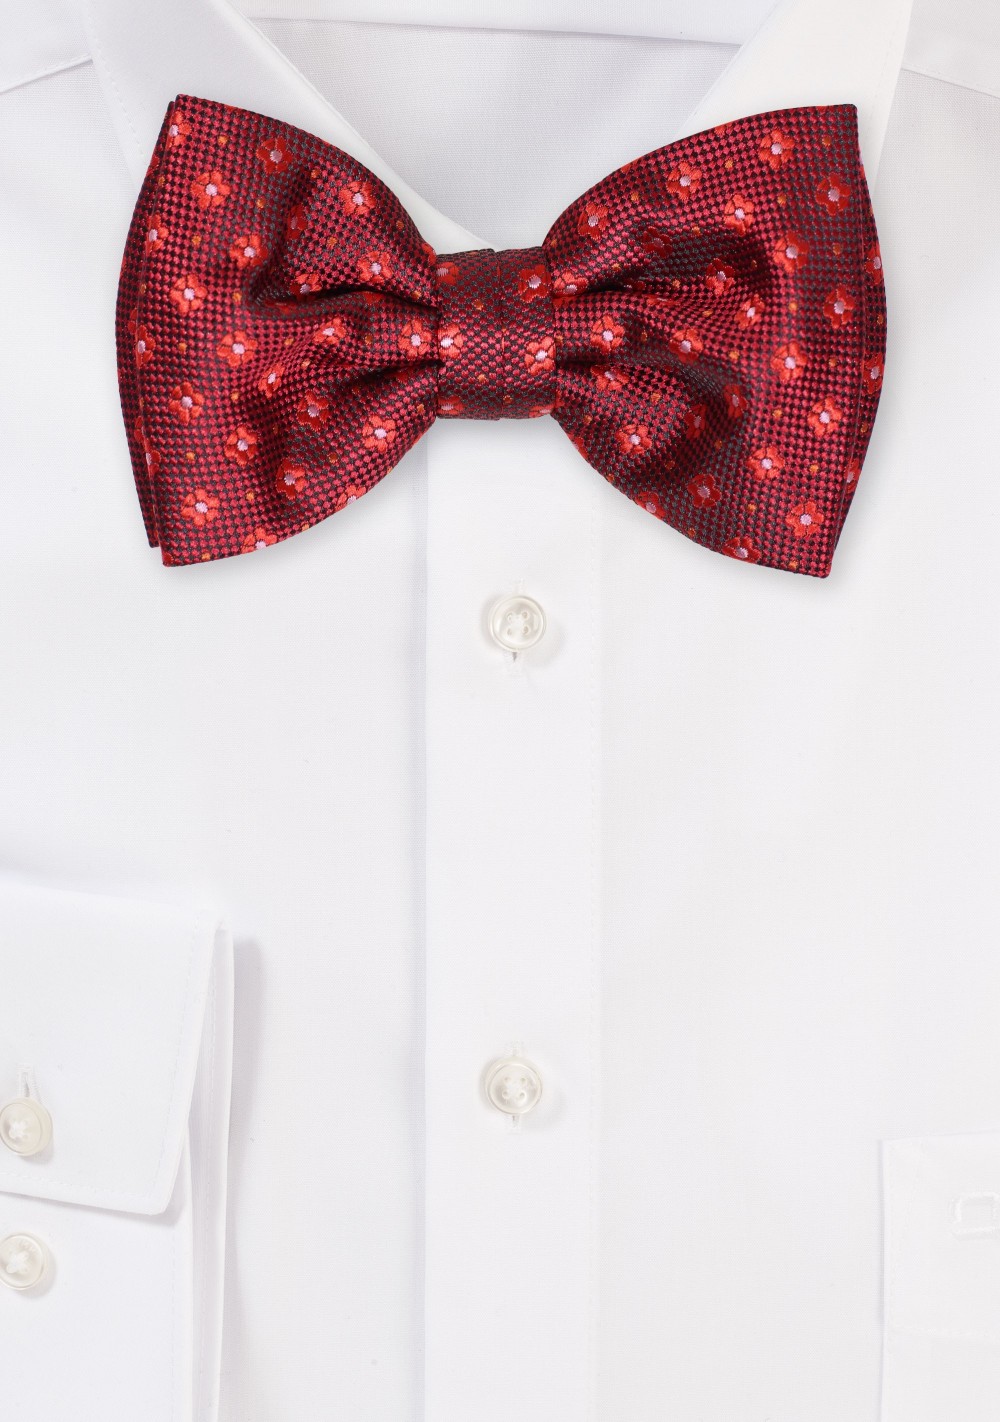 Woven Floral Bowtie in Red and Cherry